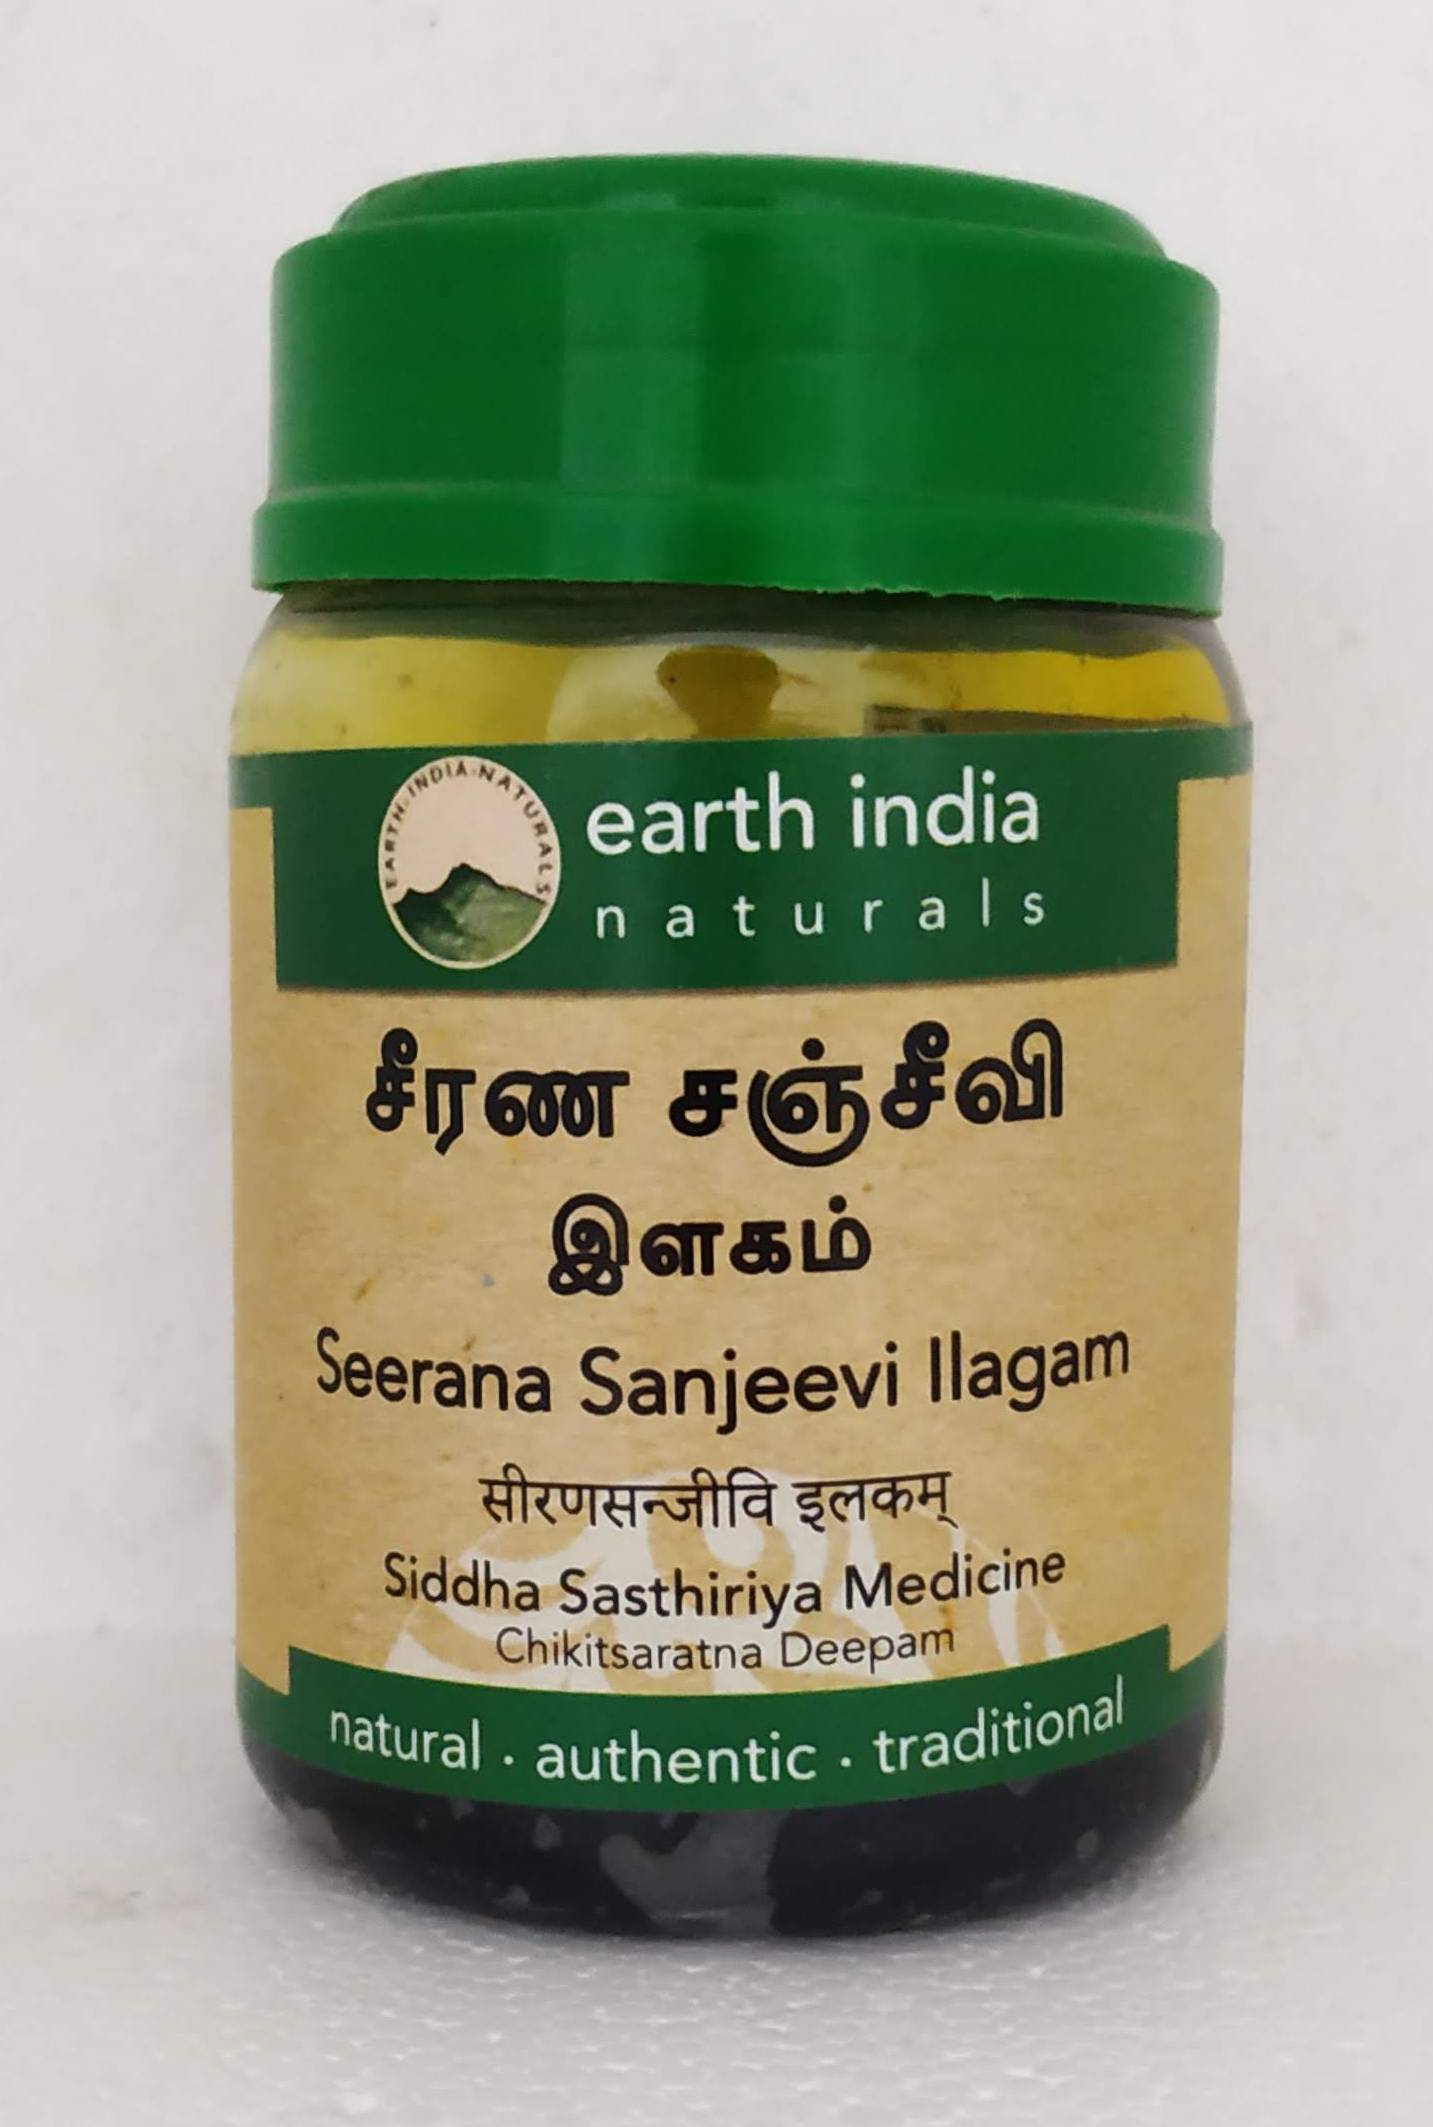 Shop Seerana Sanjeevi Ilagam 200gm at price 232.00 from Earth India Online - Ayush Care